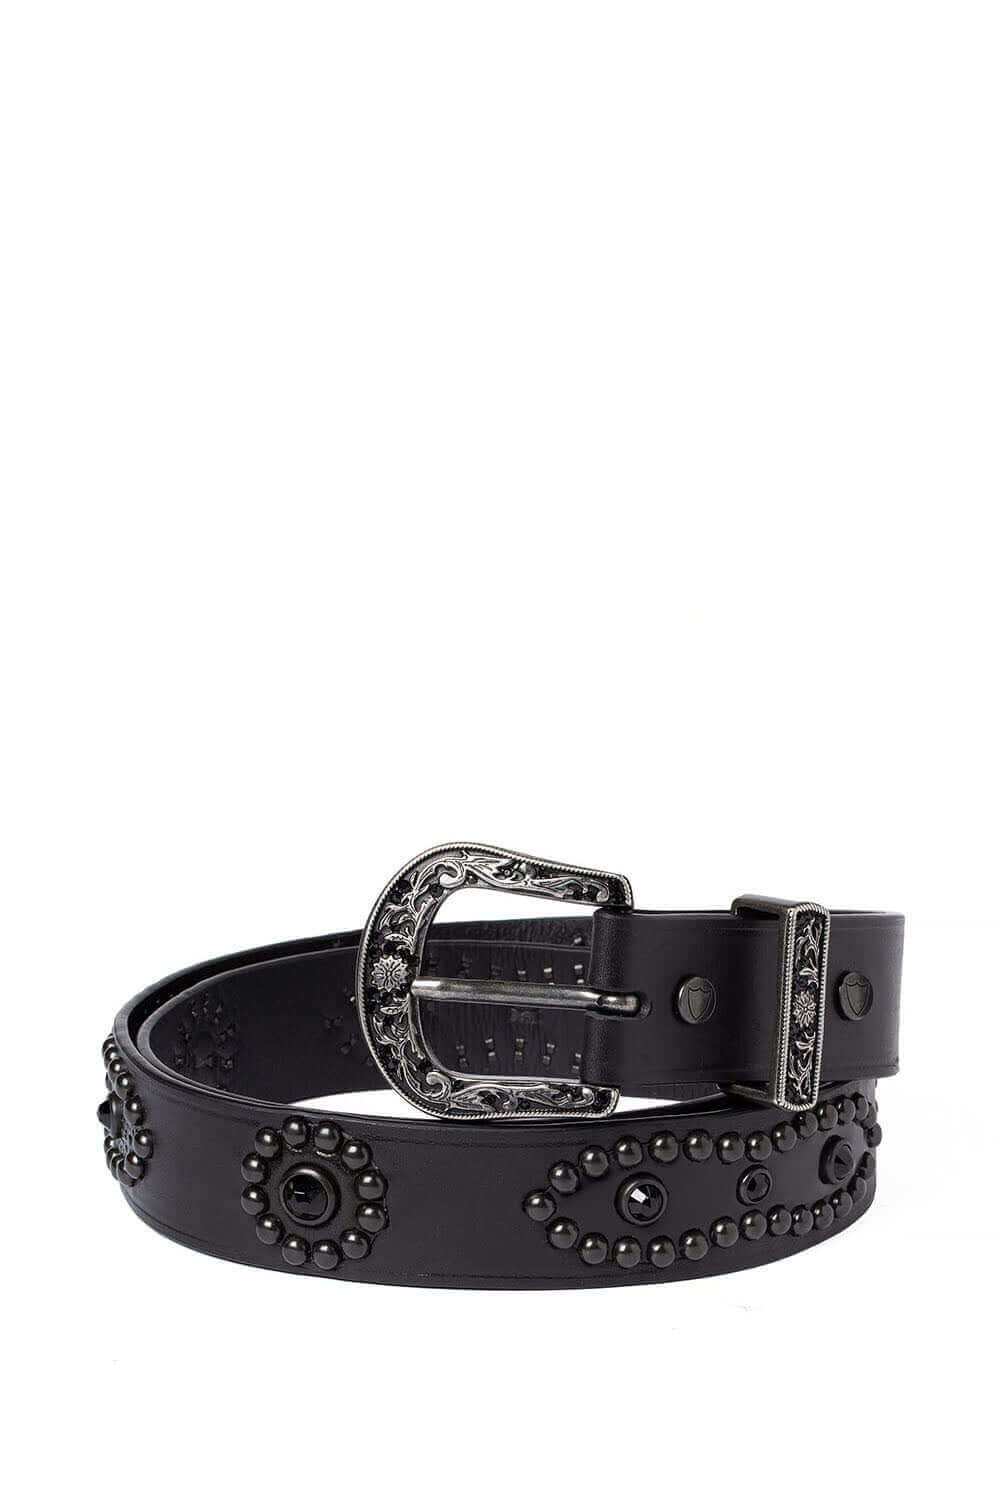 AMERICAN BELT Black leather belt with studs and rhinestones.Height: 3 cm. Made in Italy. HTC LOS ANGELES